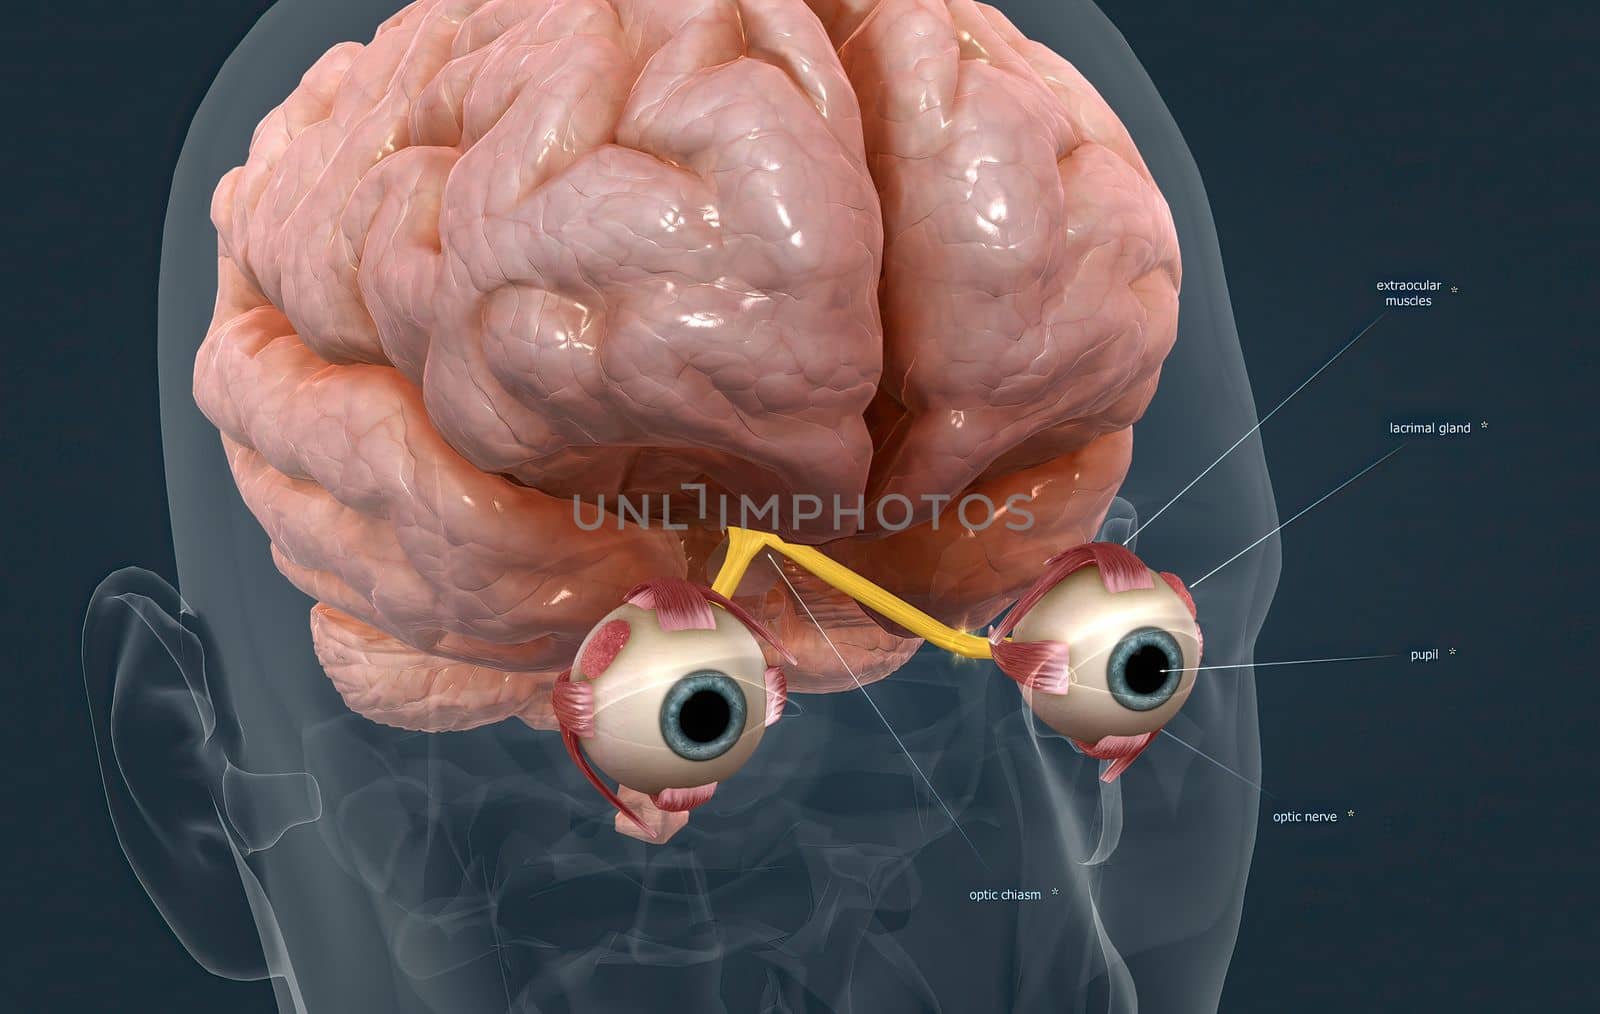 The mechanism of vision in the human eye by creativepic